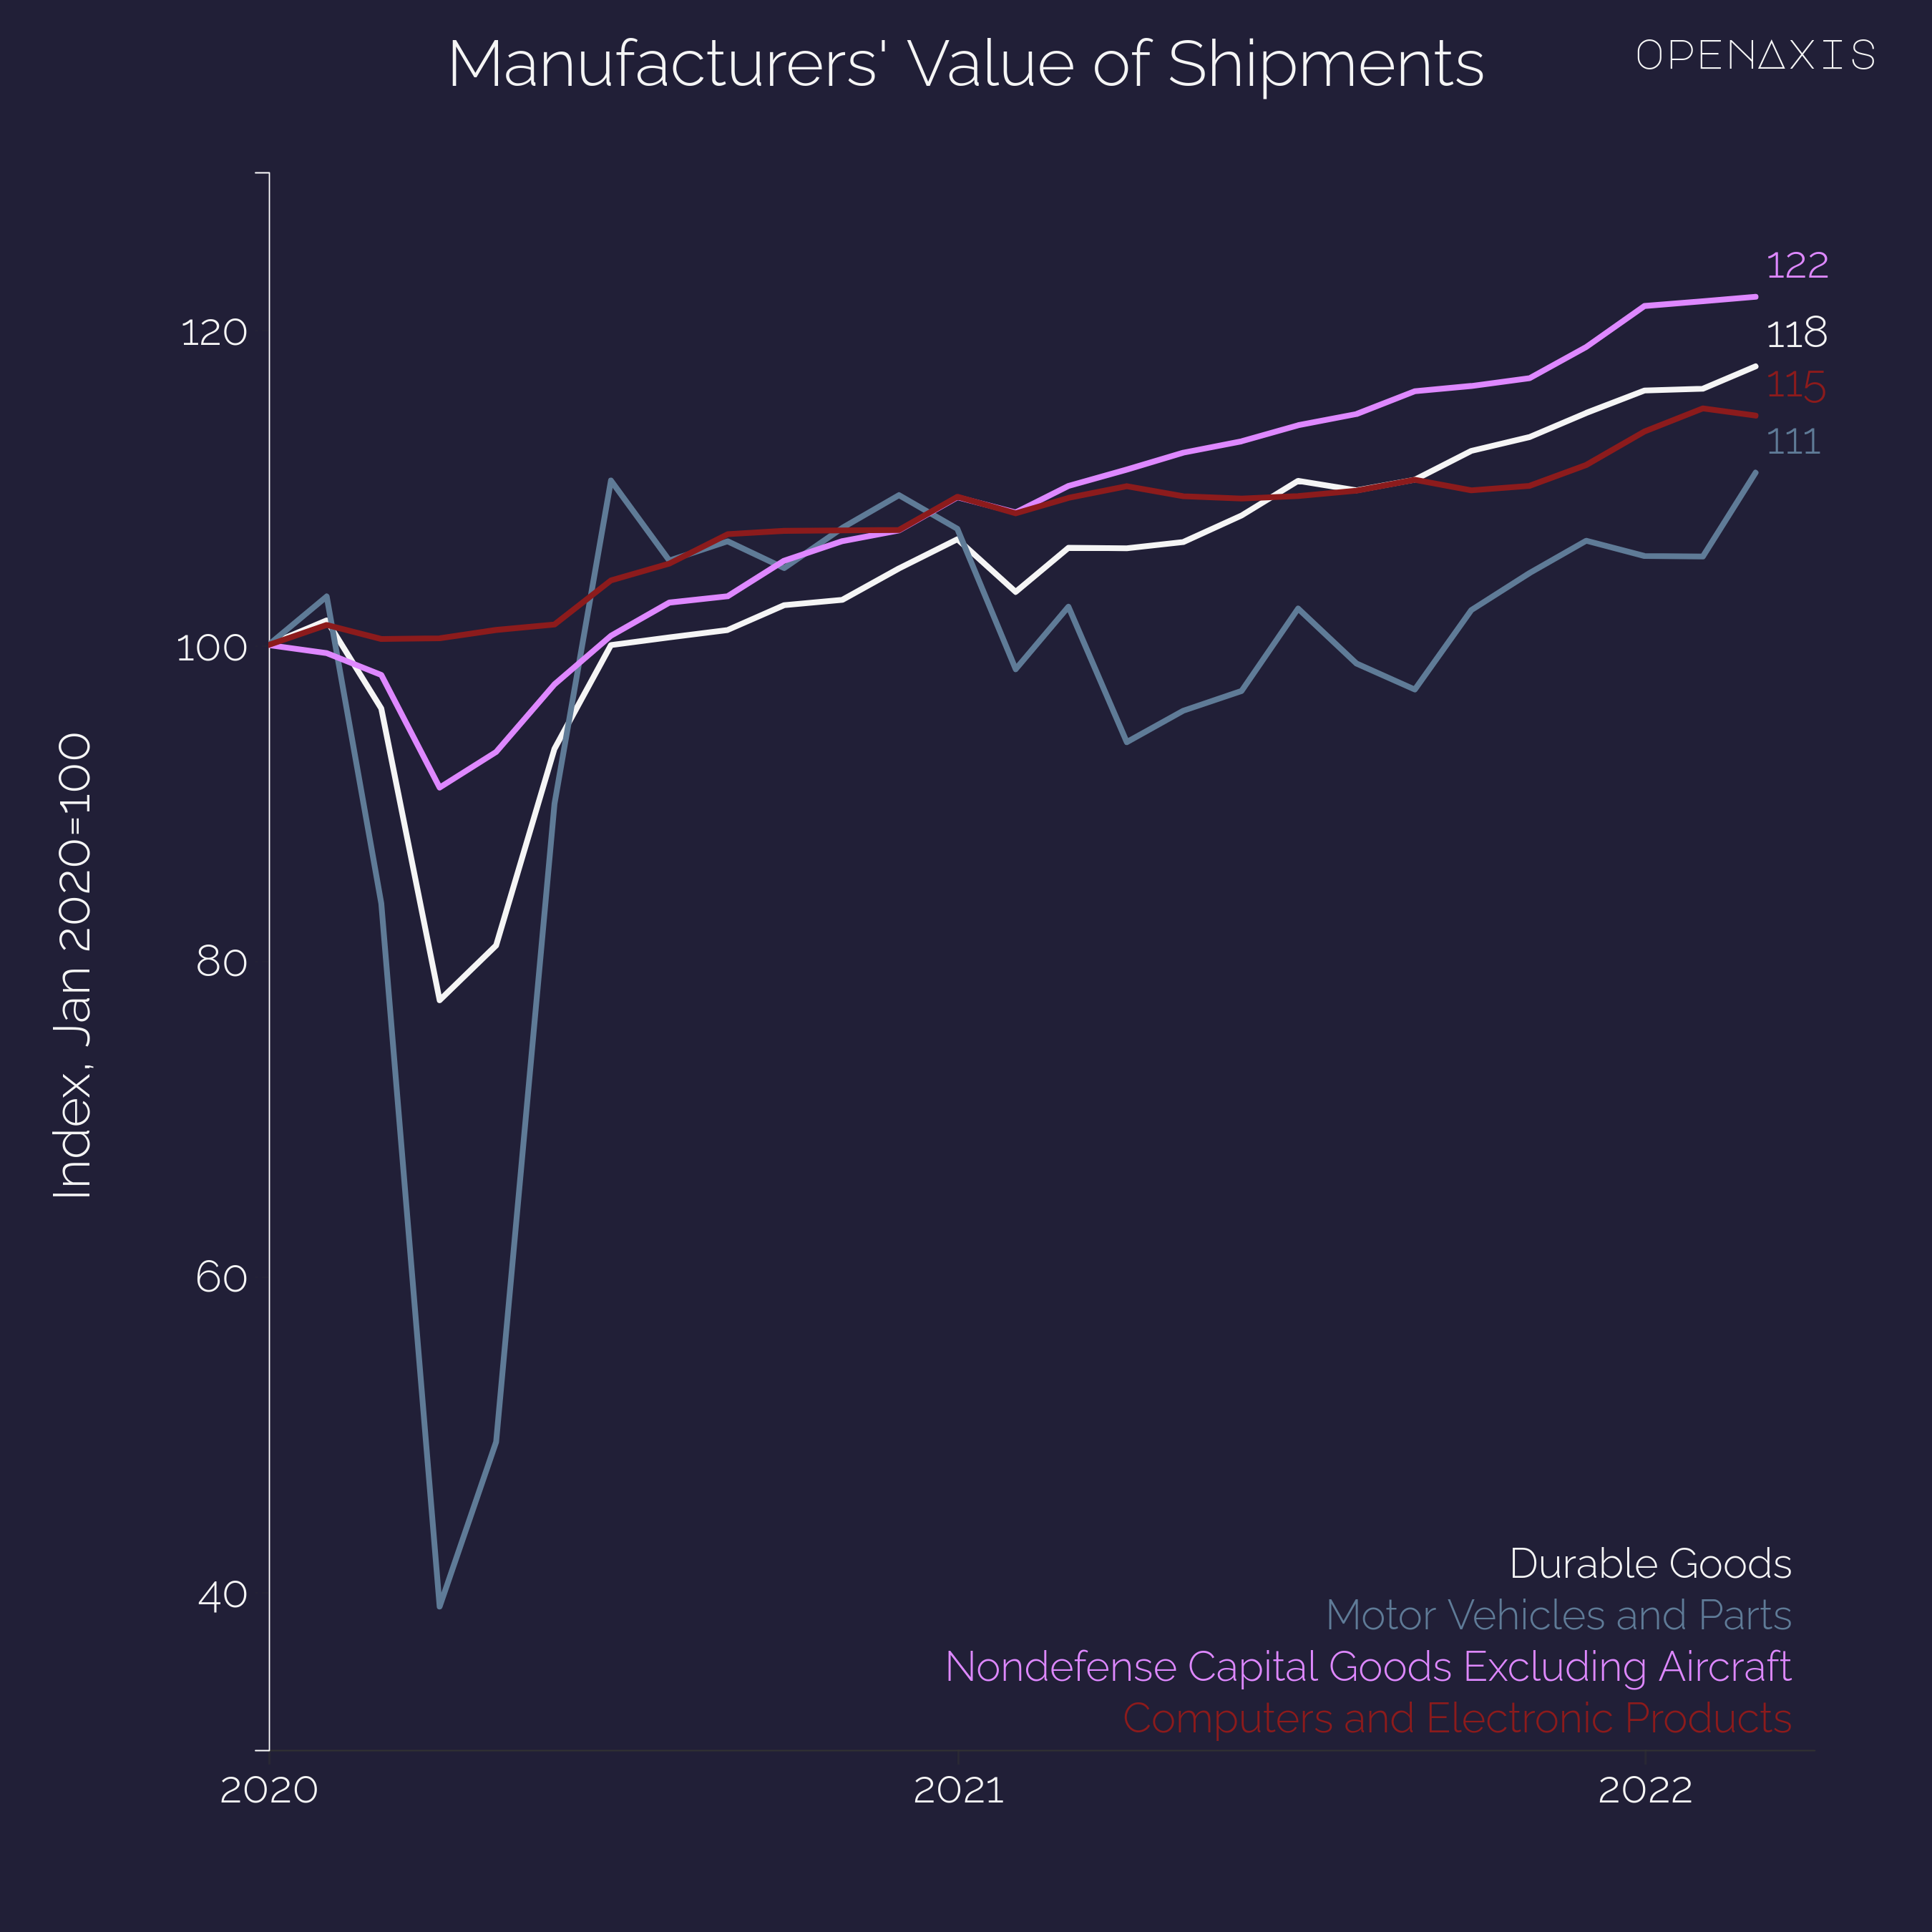 "Manufacturers' Value of Shipments"